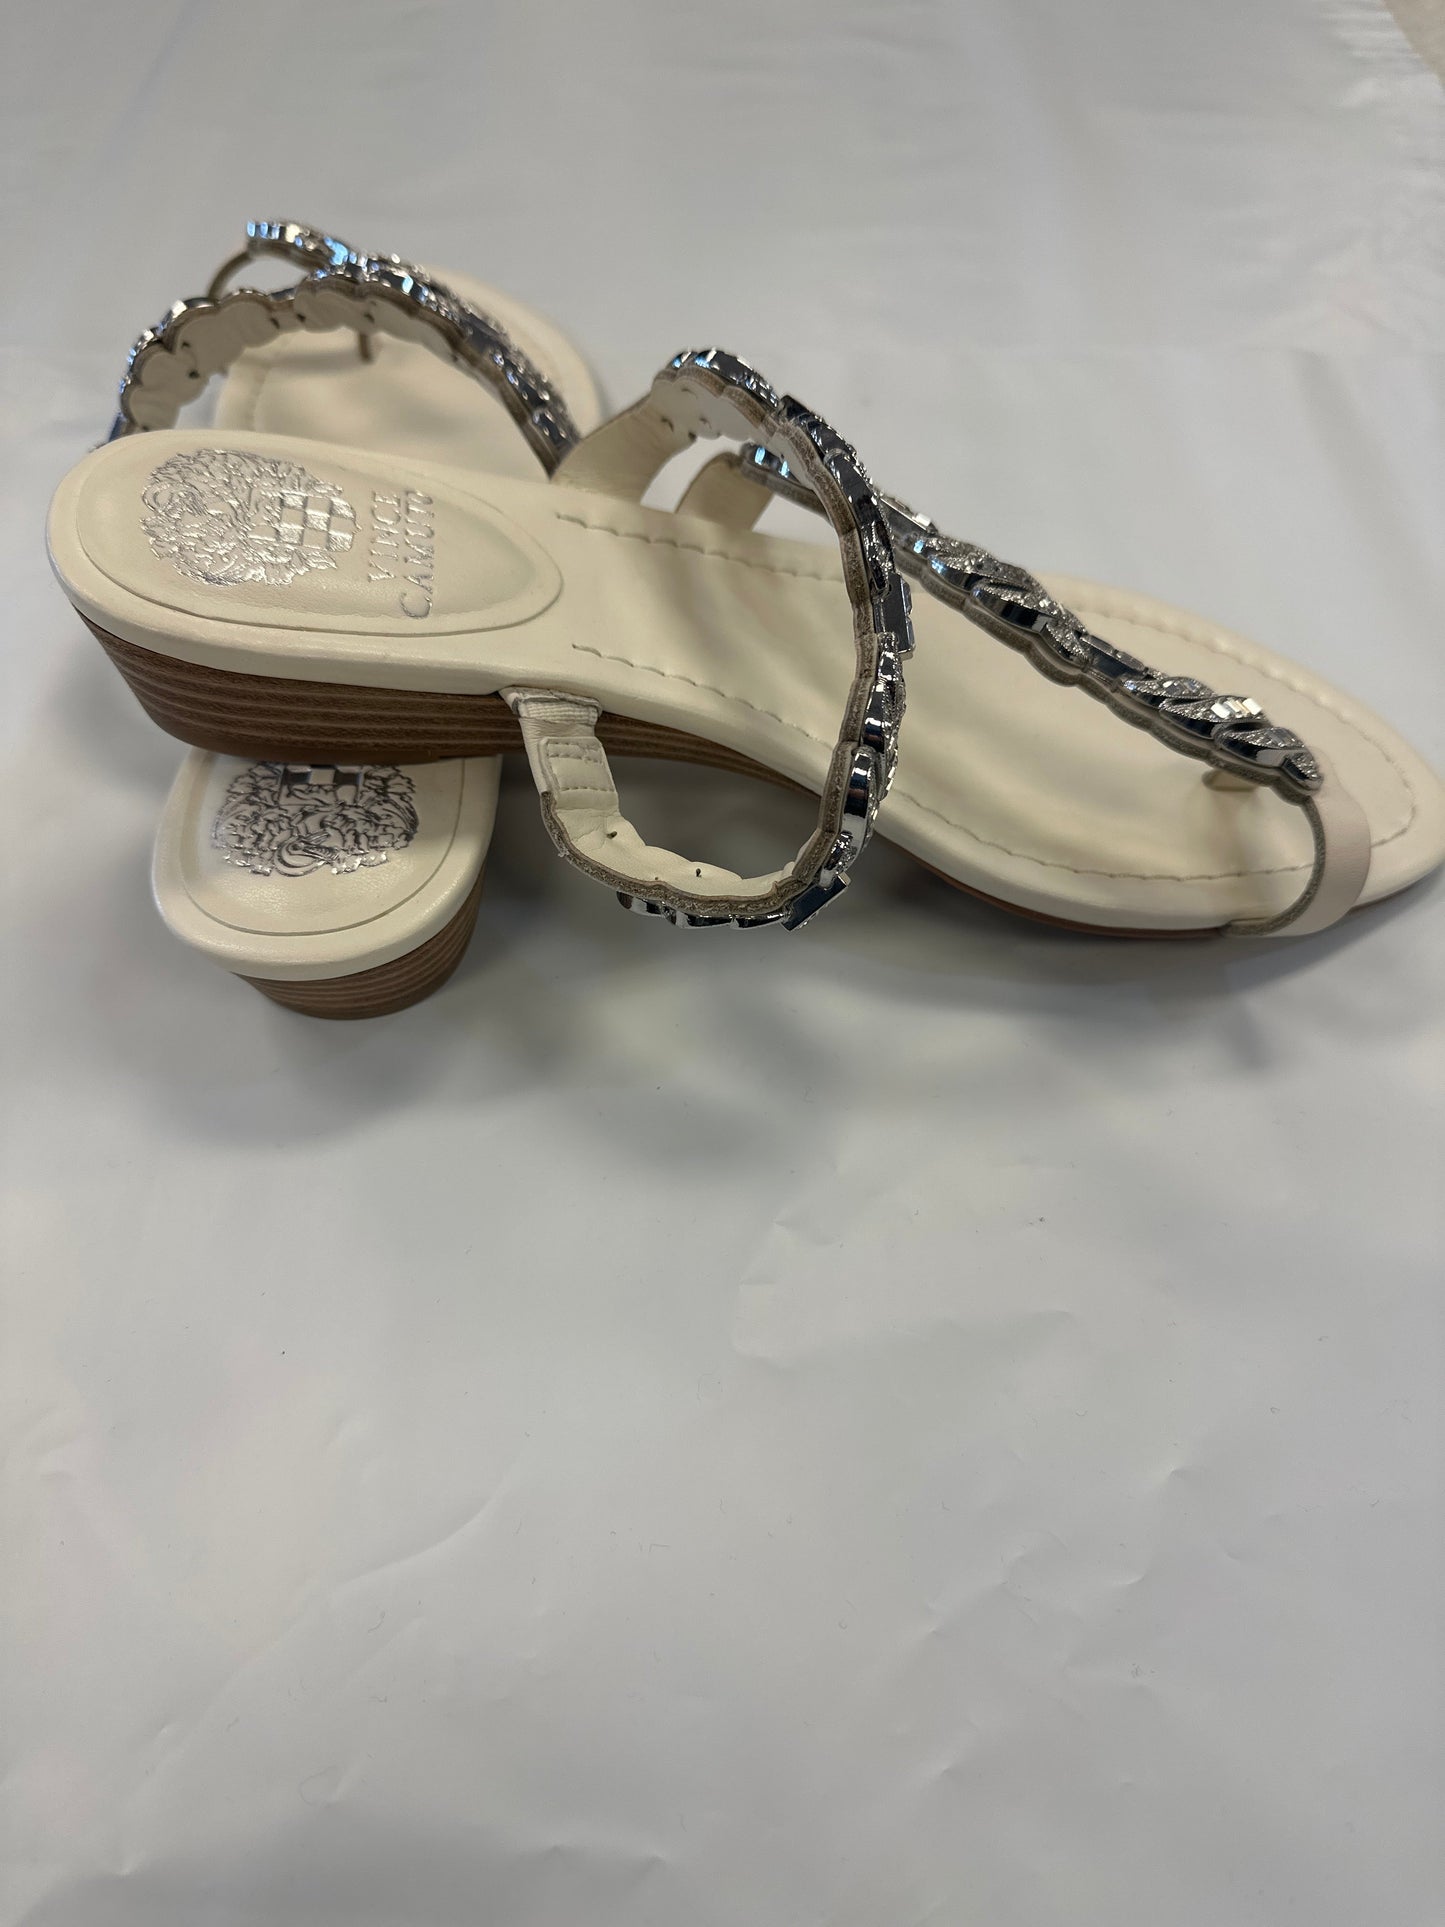 Sandals Heels Wedge By Vince Camuto  Size: 9.5